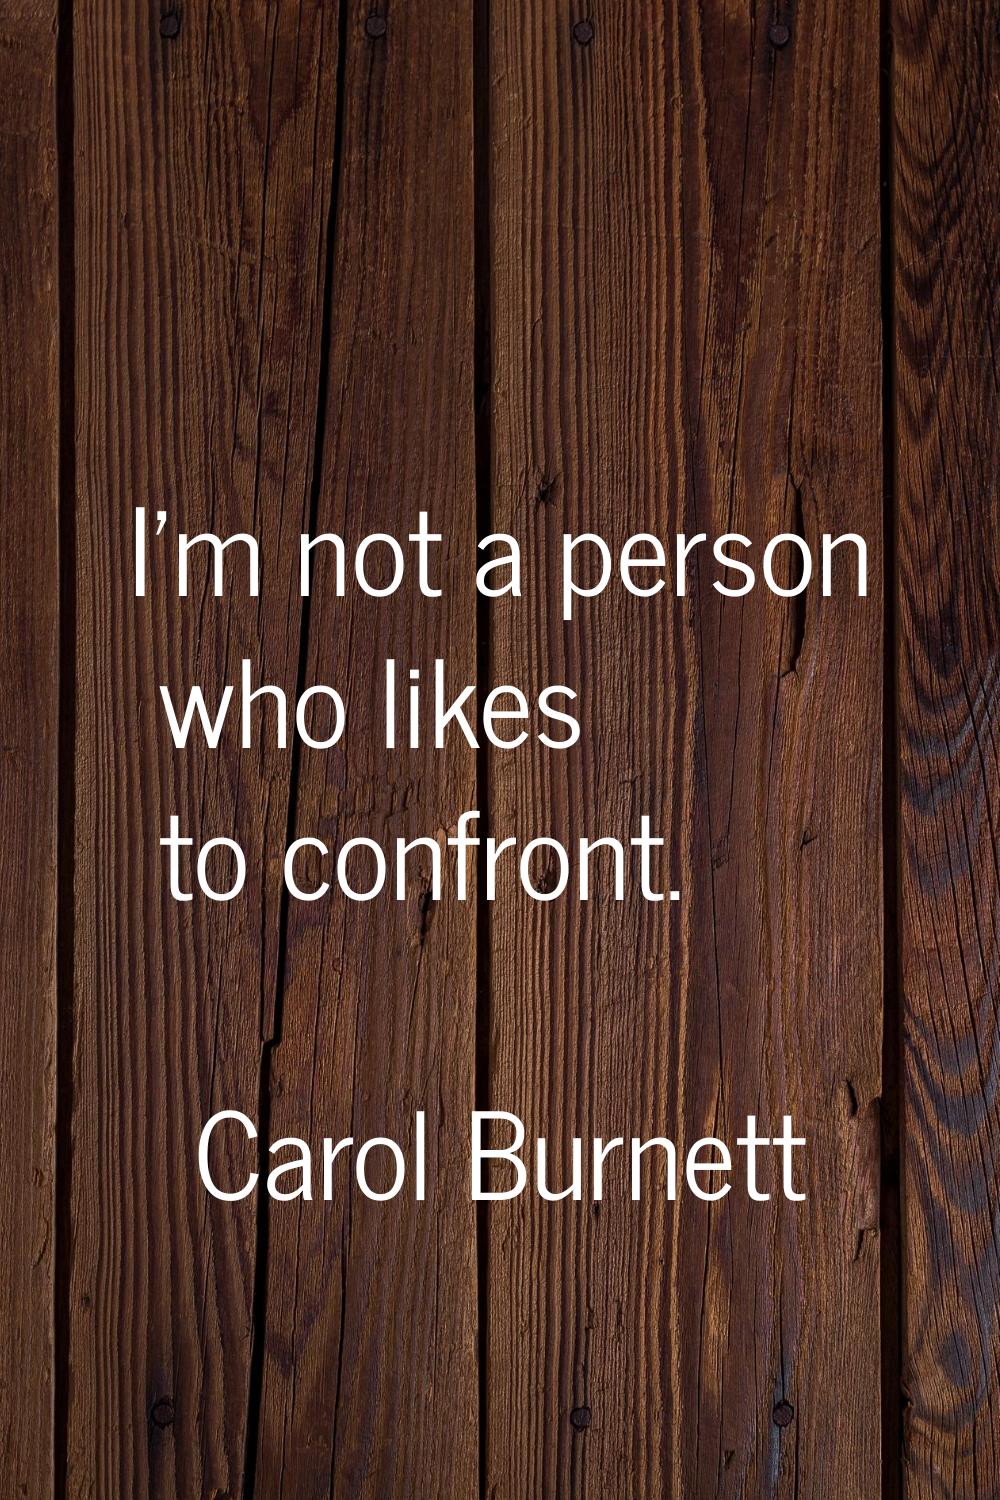 I'm not a person who likes to confront.